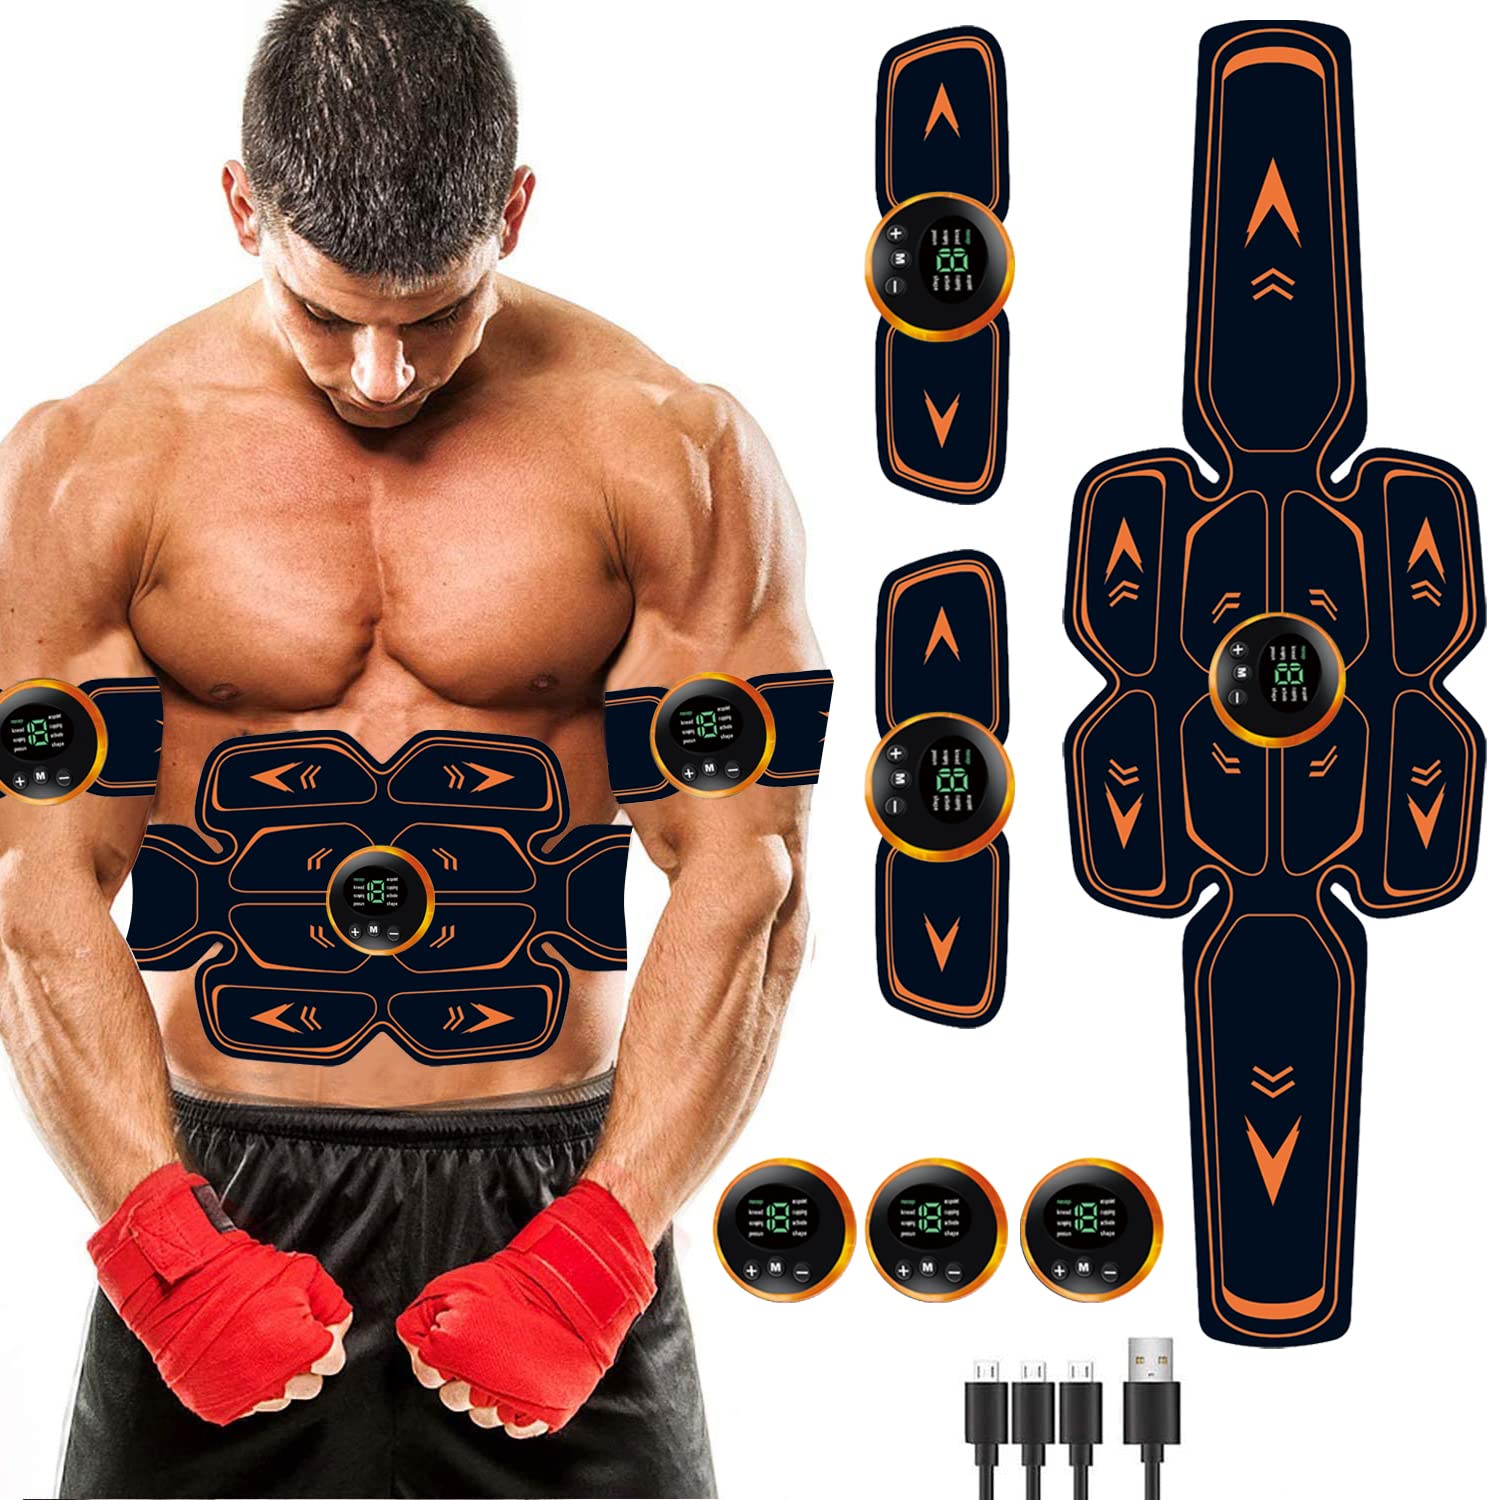 Abs Trainer, Abdominal Toning Belt Trainer, Abs Workout Equipment